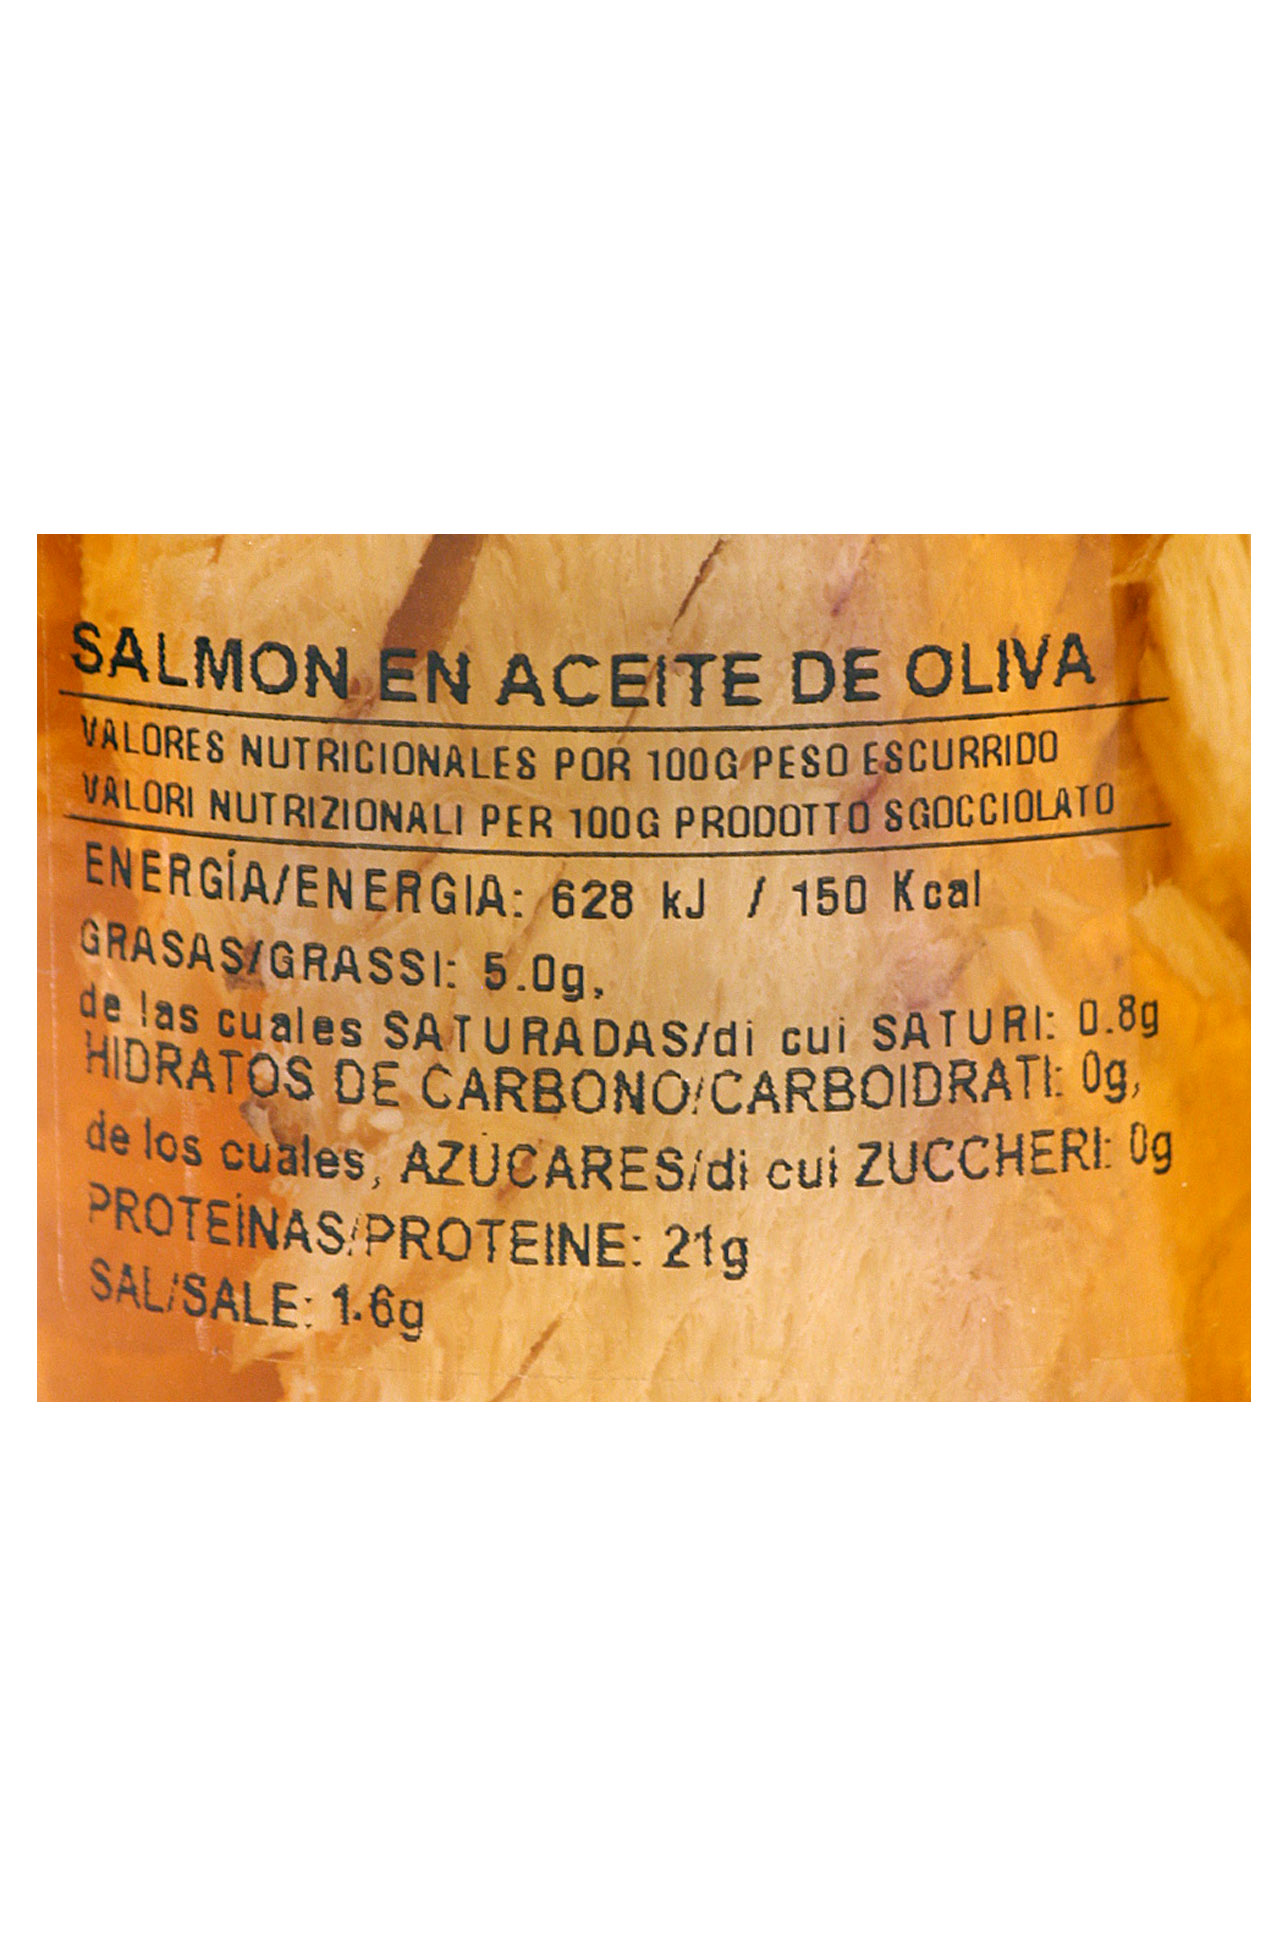 CP194: Smoked salmon in olive oil